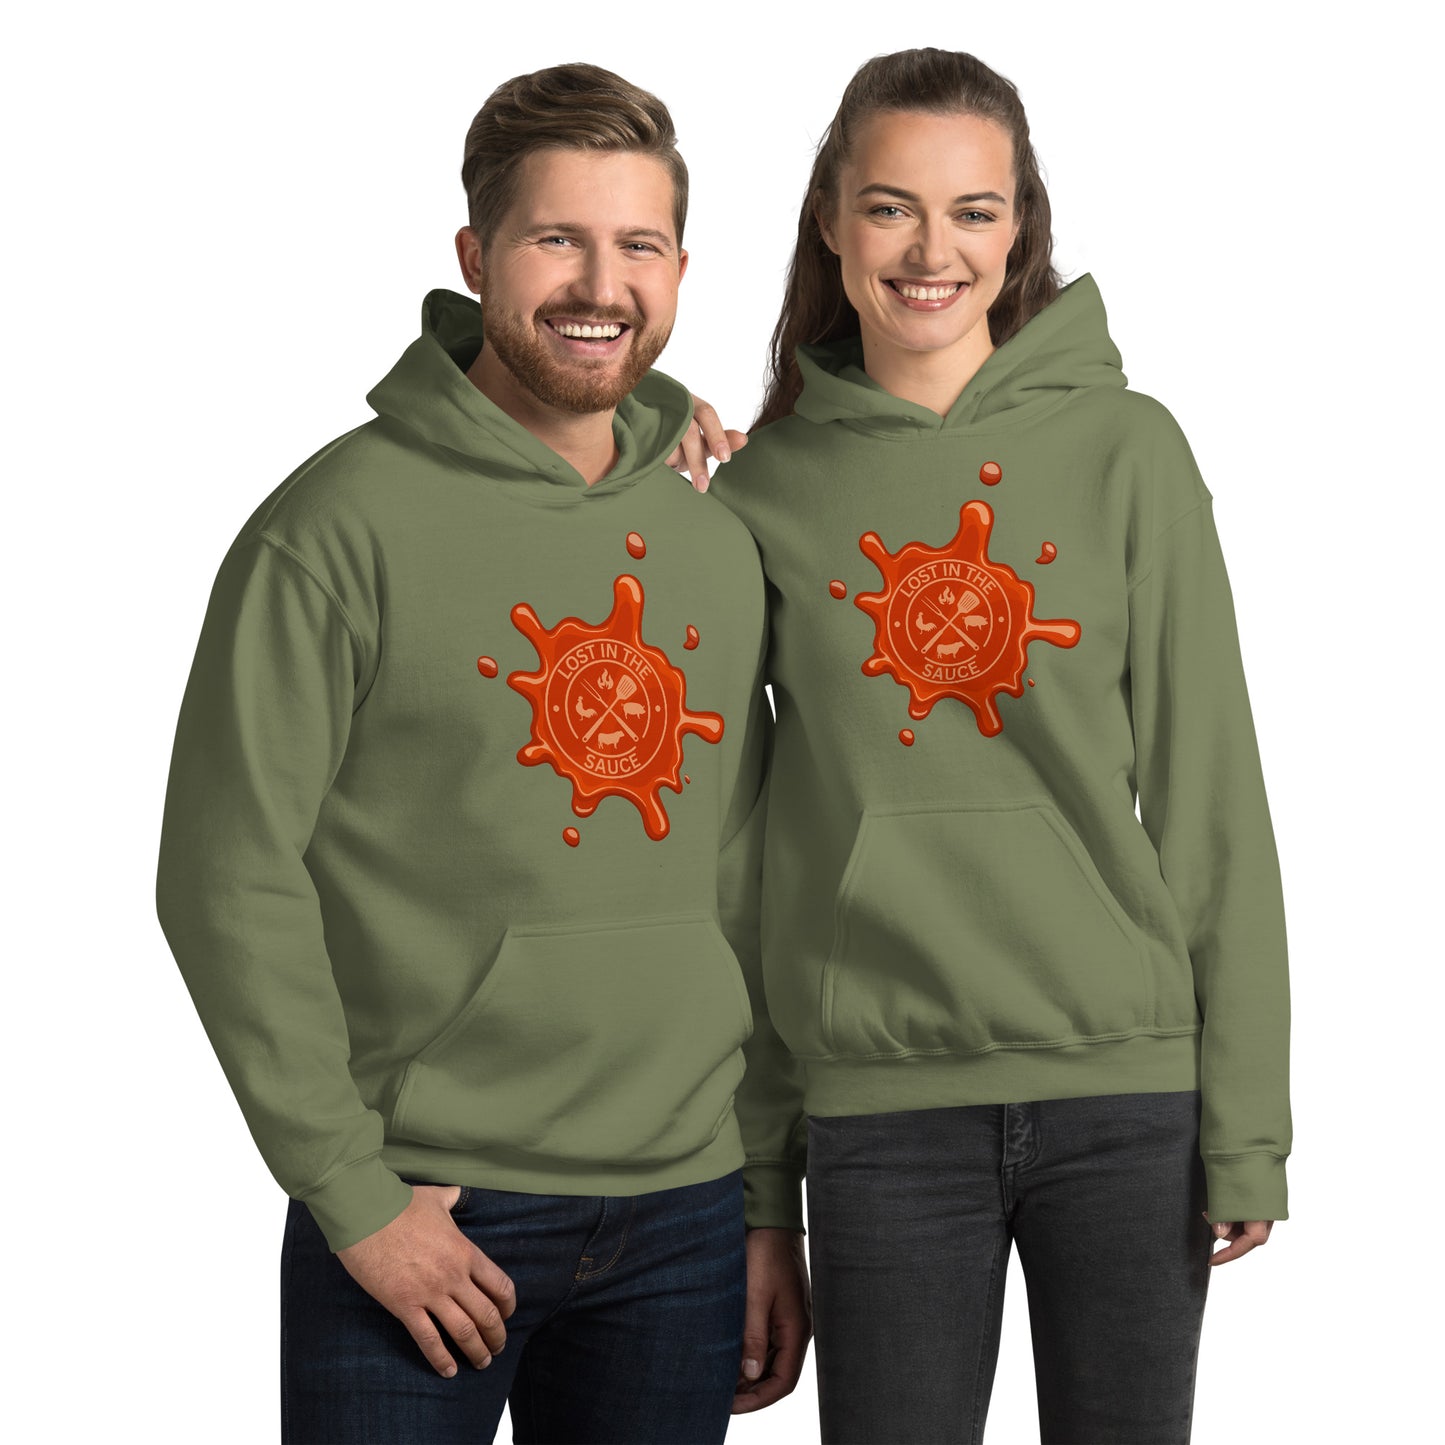 LOST IN THE SAUCE (BBQ) Unisex Hoodie